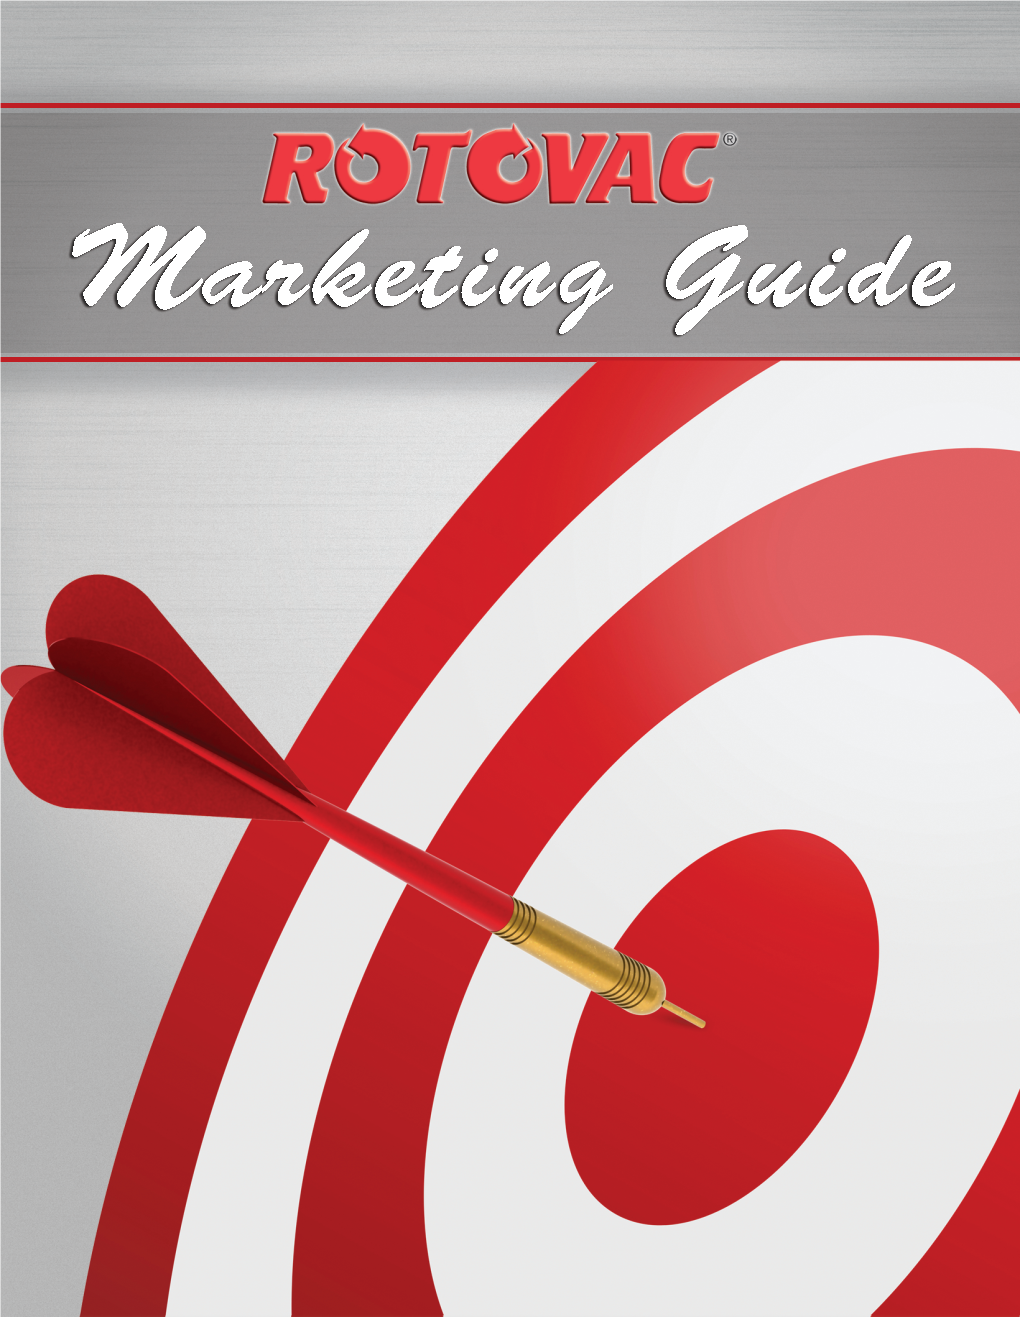 Welcome to the Rotovac Business Startup Marketing Plan. Our Goal